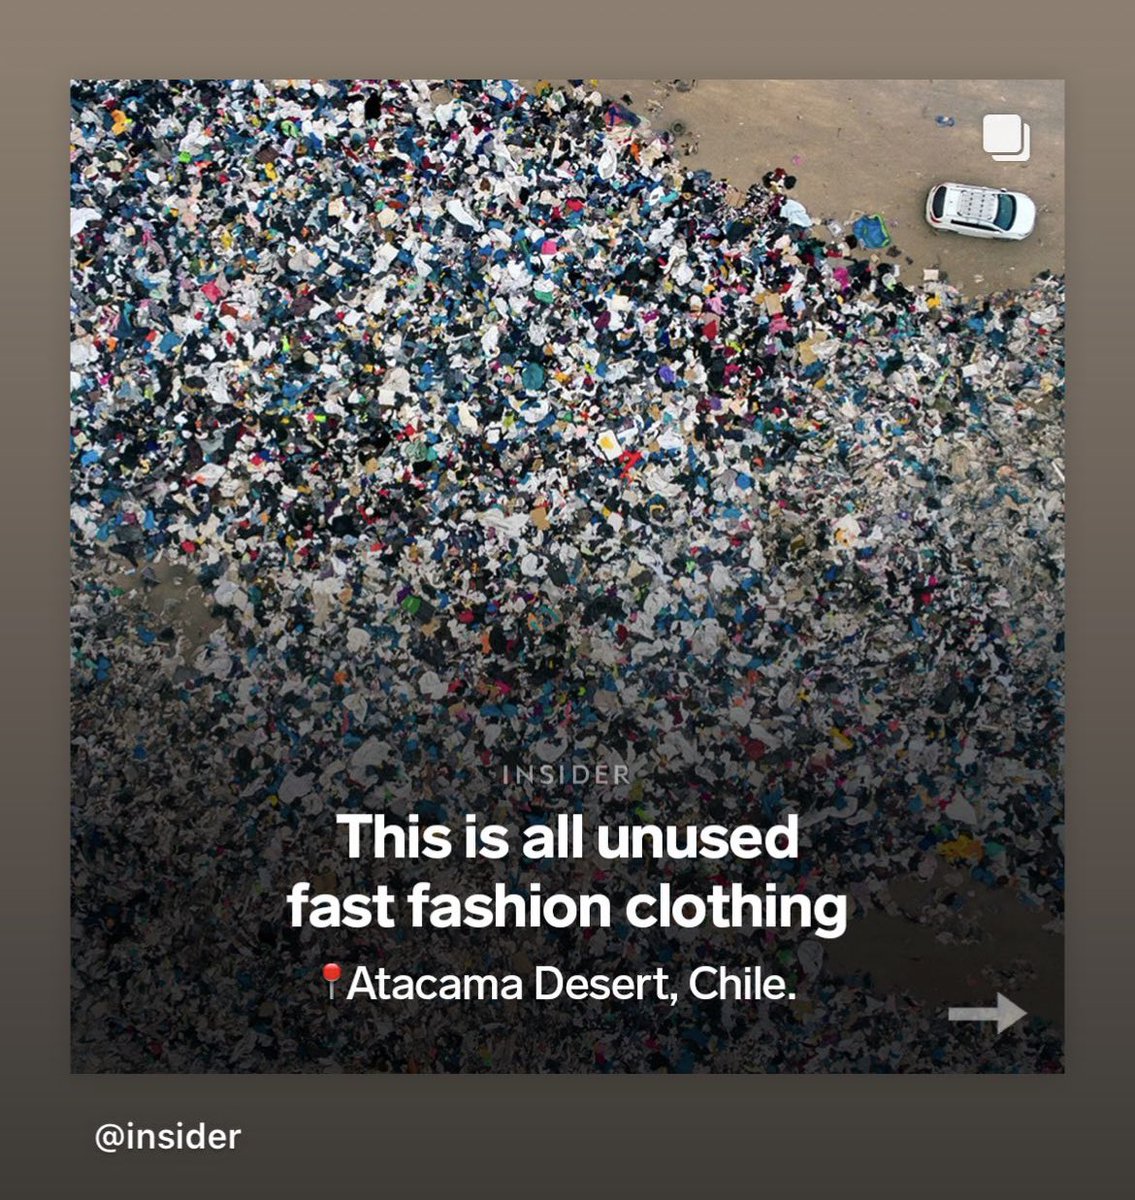 Start thinking and acting like a citizen rather than a consumer.
We need to consciously make an effort towards sustainable fashion 🌏

Below are a few practices we can incorporate at a personal level 🧵👇

#saynotofastfashion